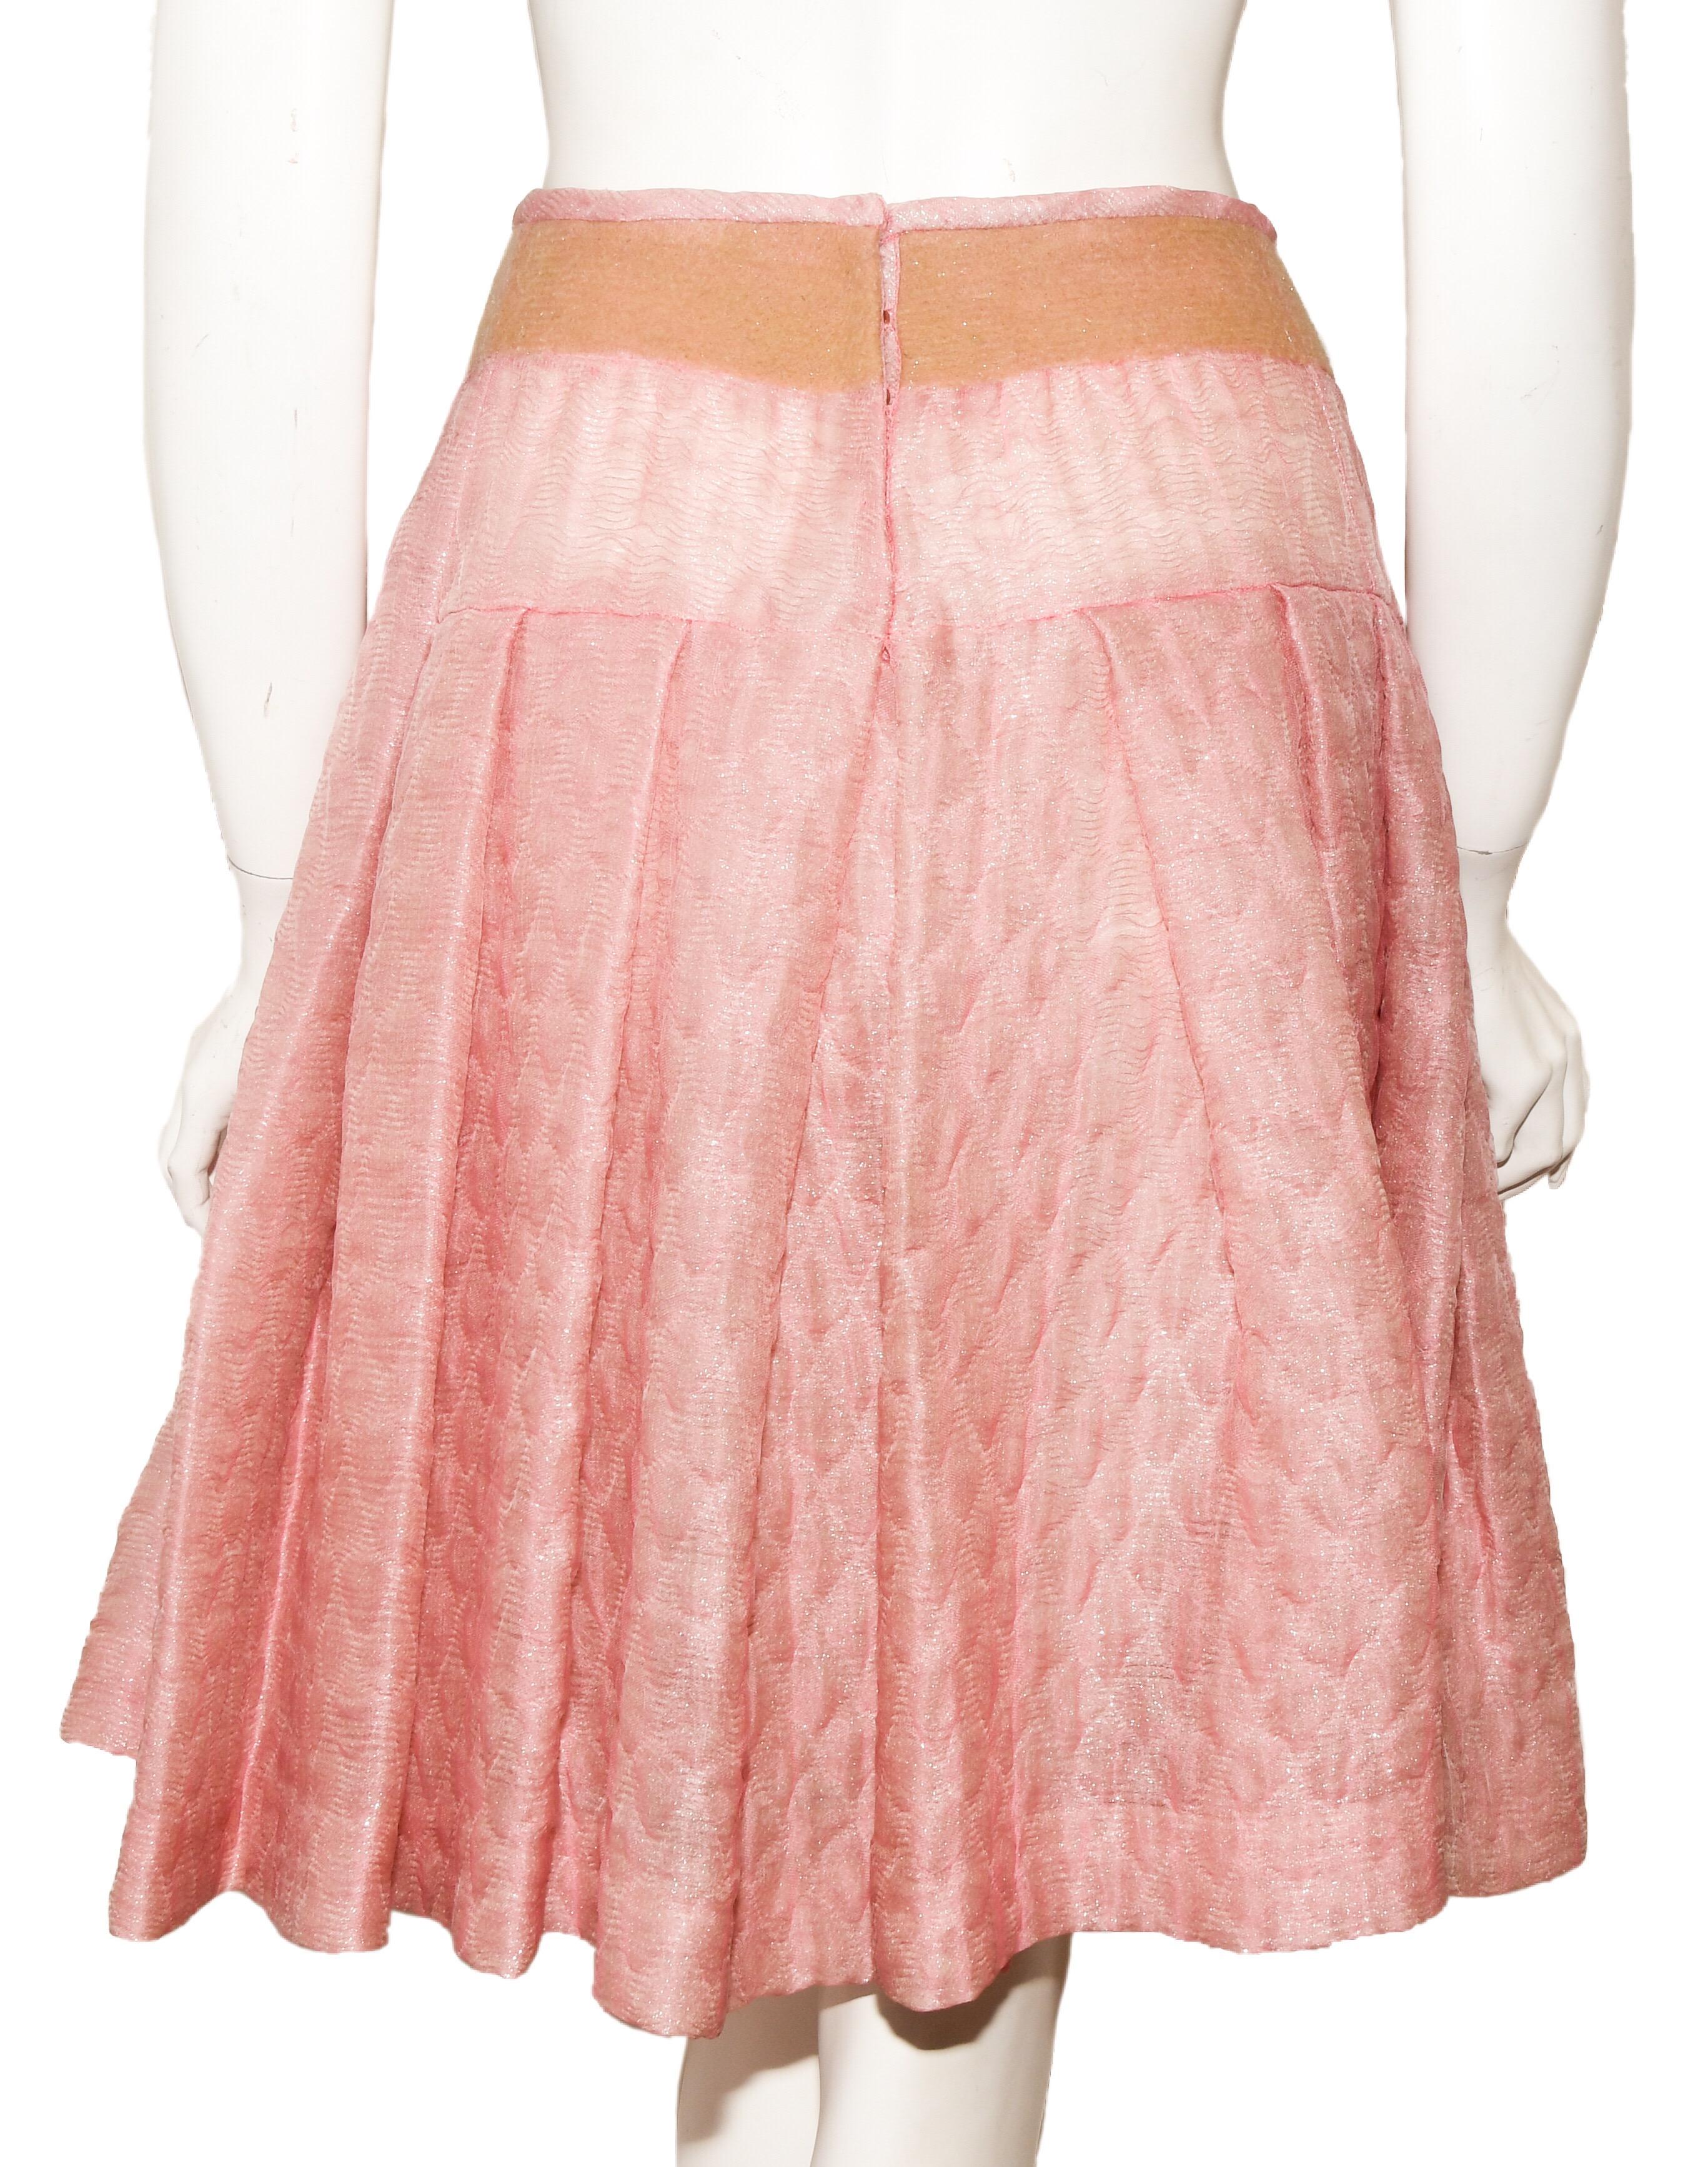 Miu Miu Silk Blend Pink Quilted Skirt Accentuated with Silver Tone Threads   In Good Condition For Sale In Palm Beach, FL